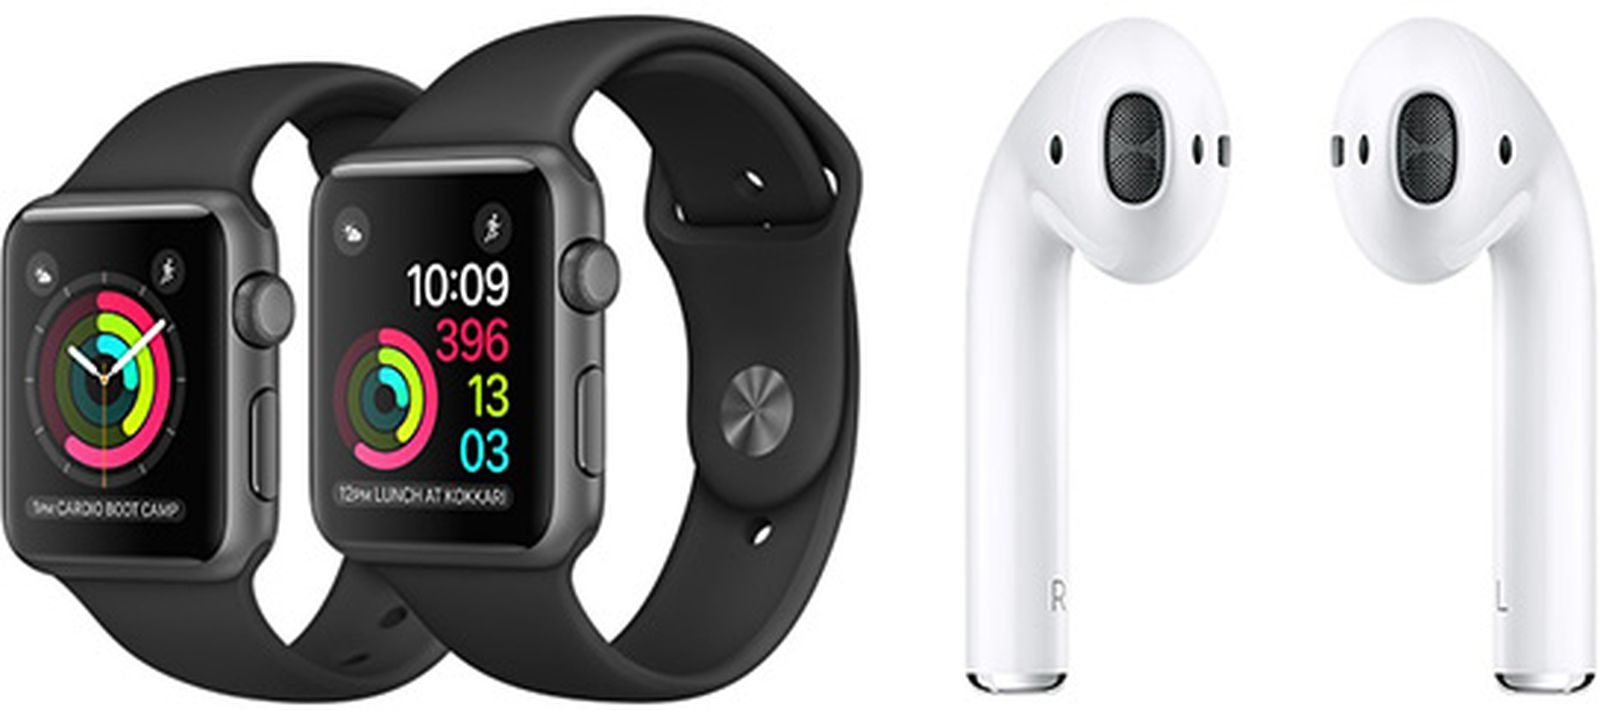 Analyst Suggests Third-Generation Apple Watch Will Include 